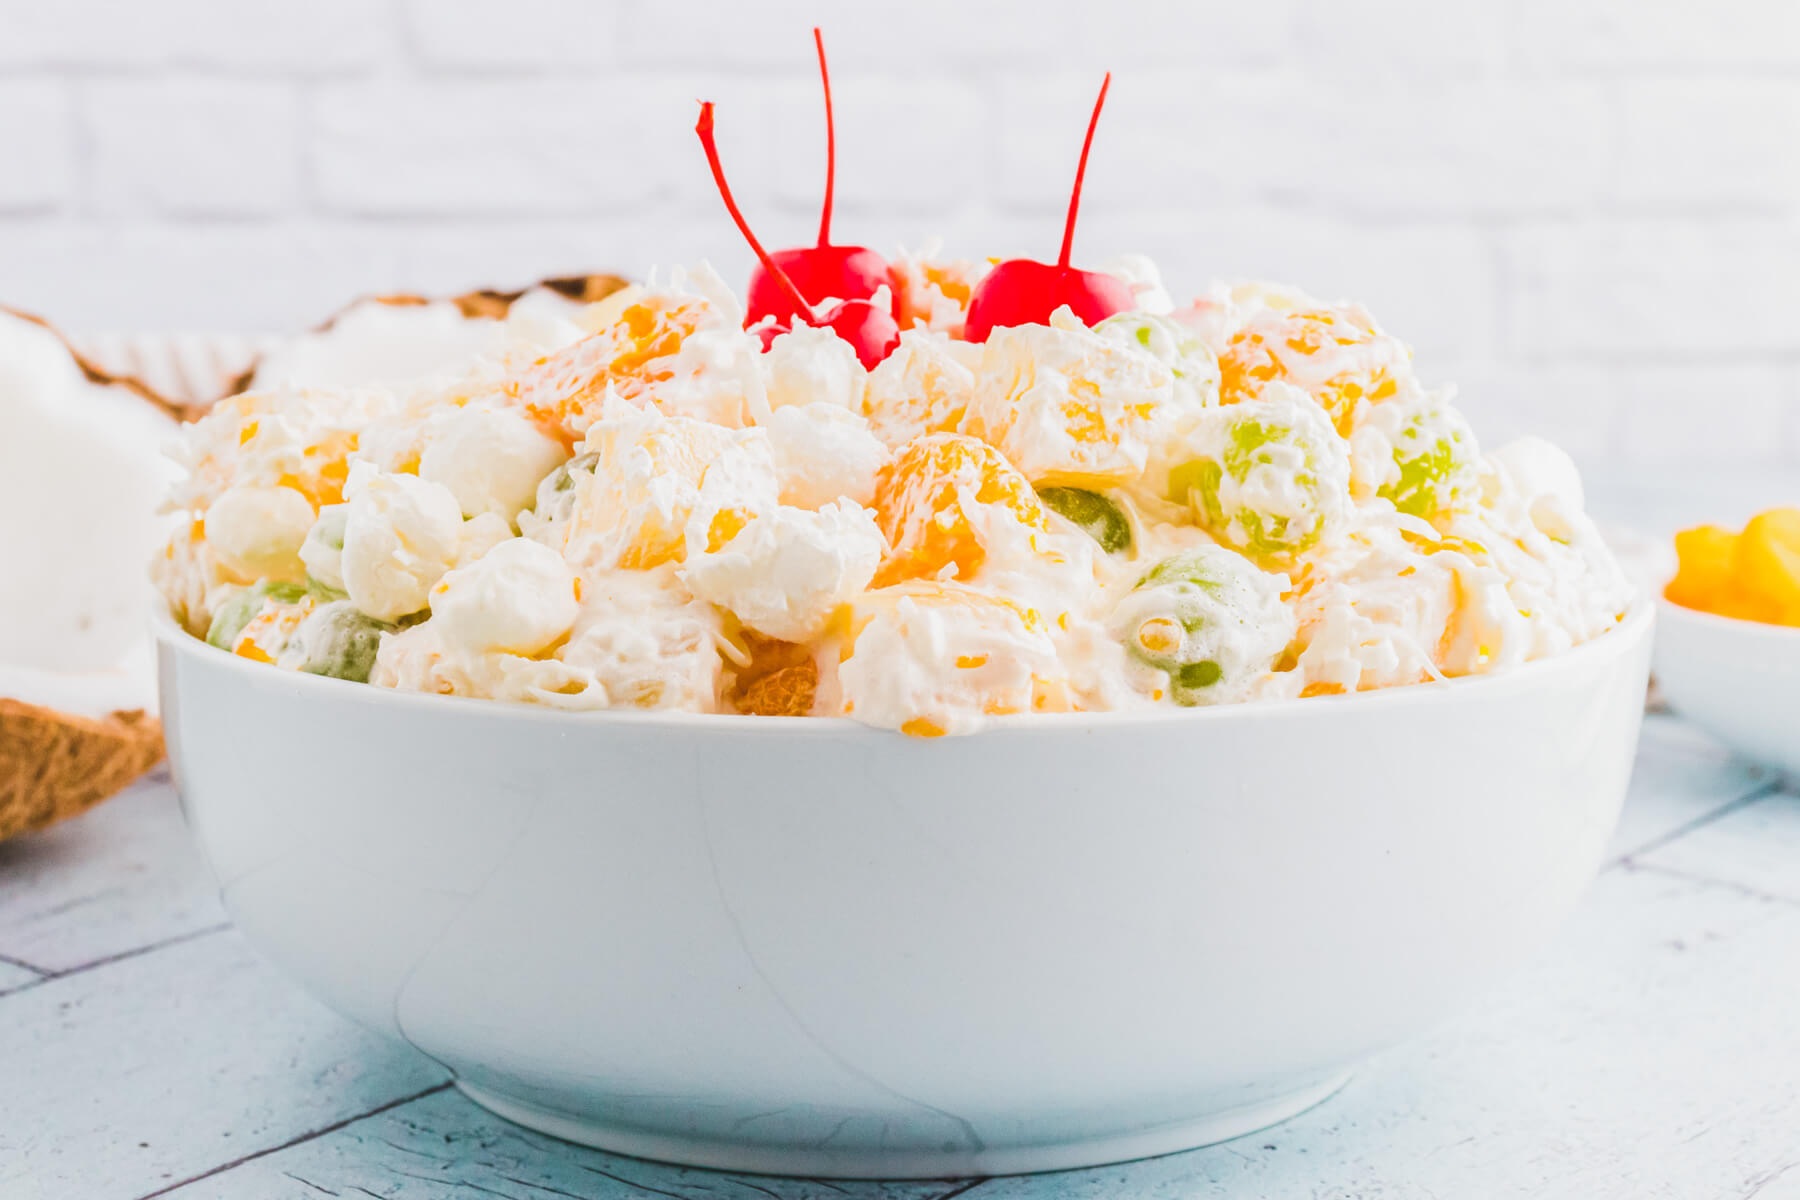 A white bowl of fluffy dreamy Ambrosia fruit salad garnished with maraschino cherries on a light blue background.